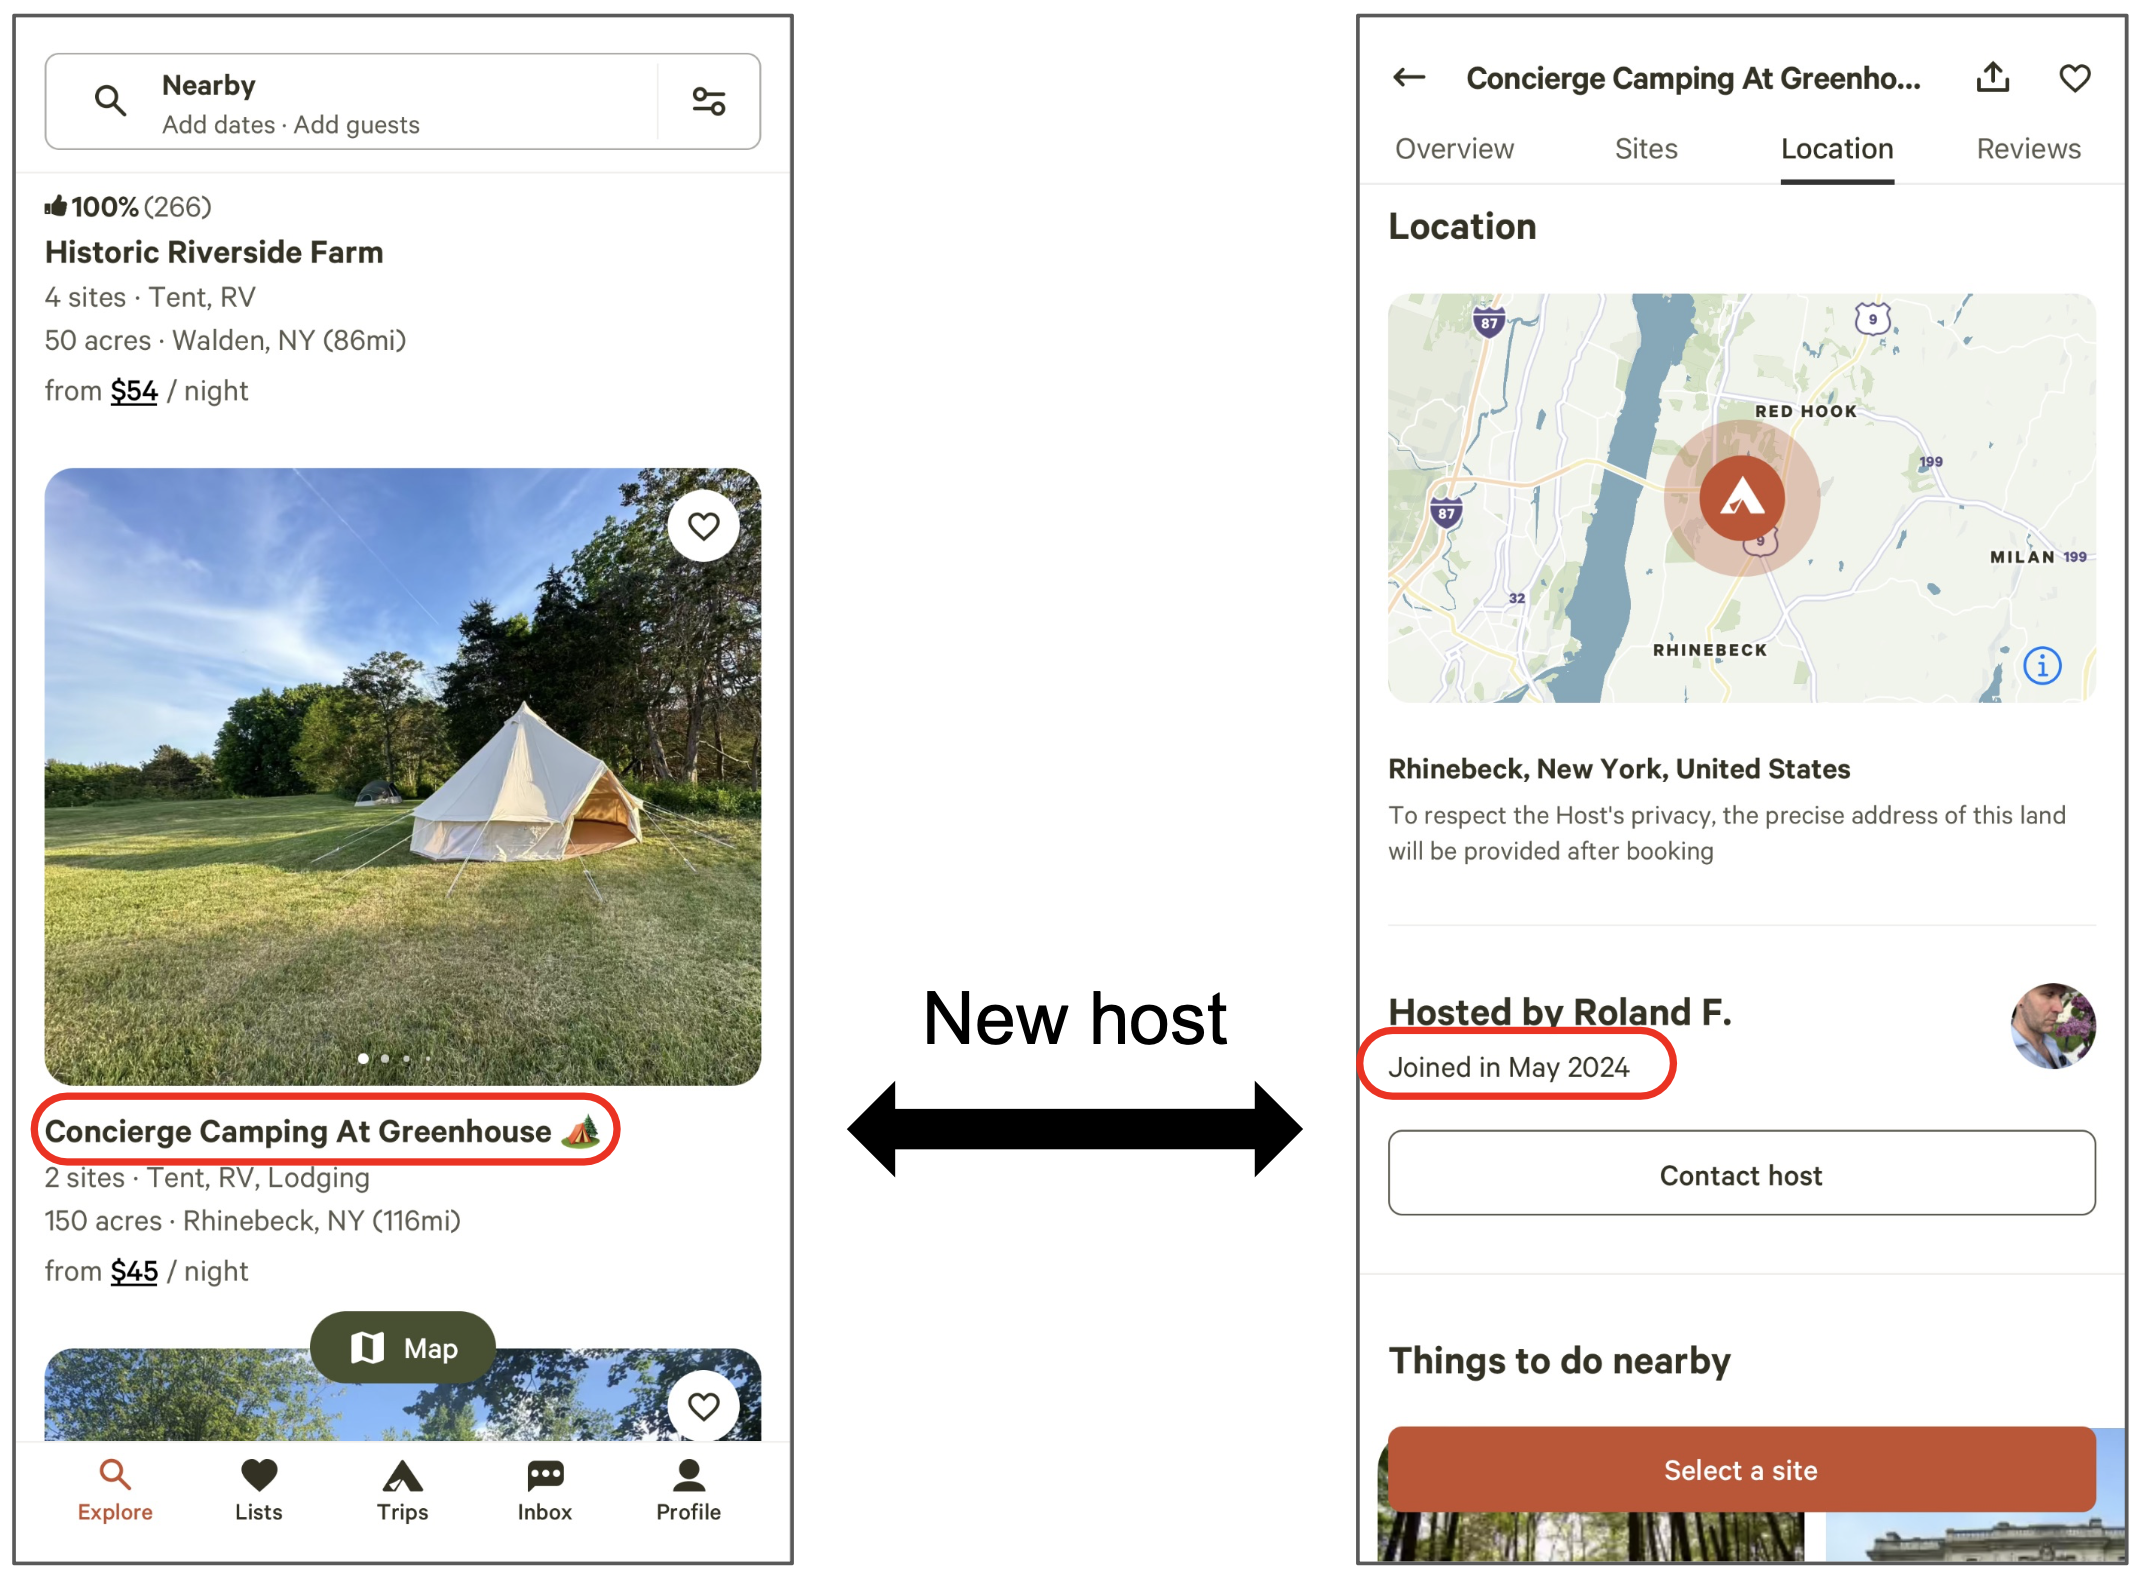 Hipcamp has a challenger slot that promotes listings from hosts who are new to the platform